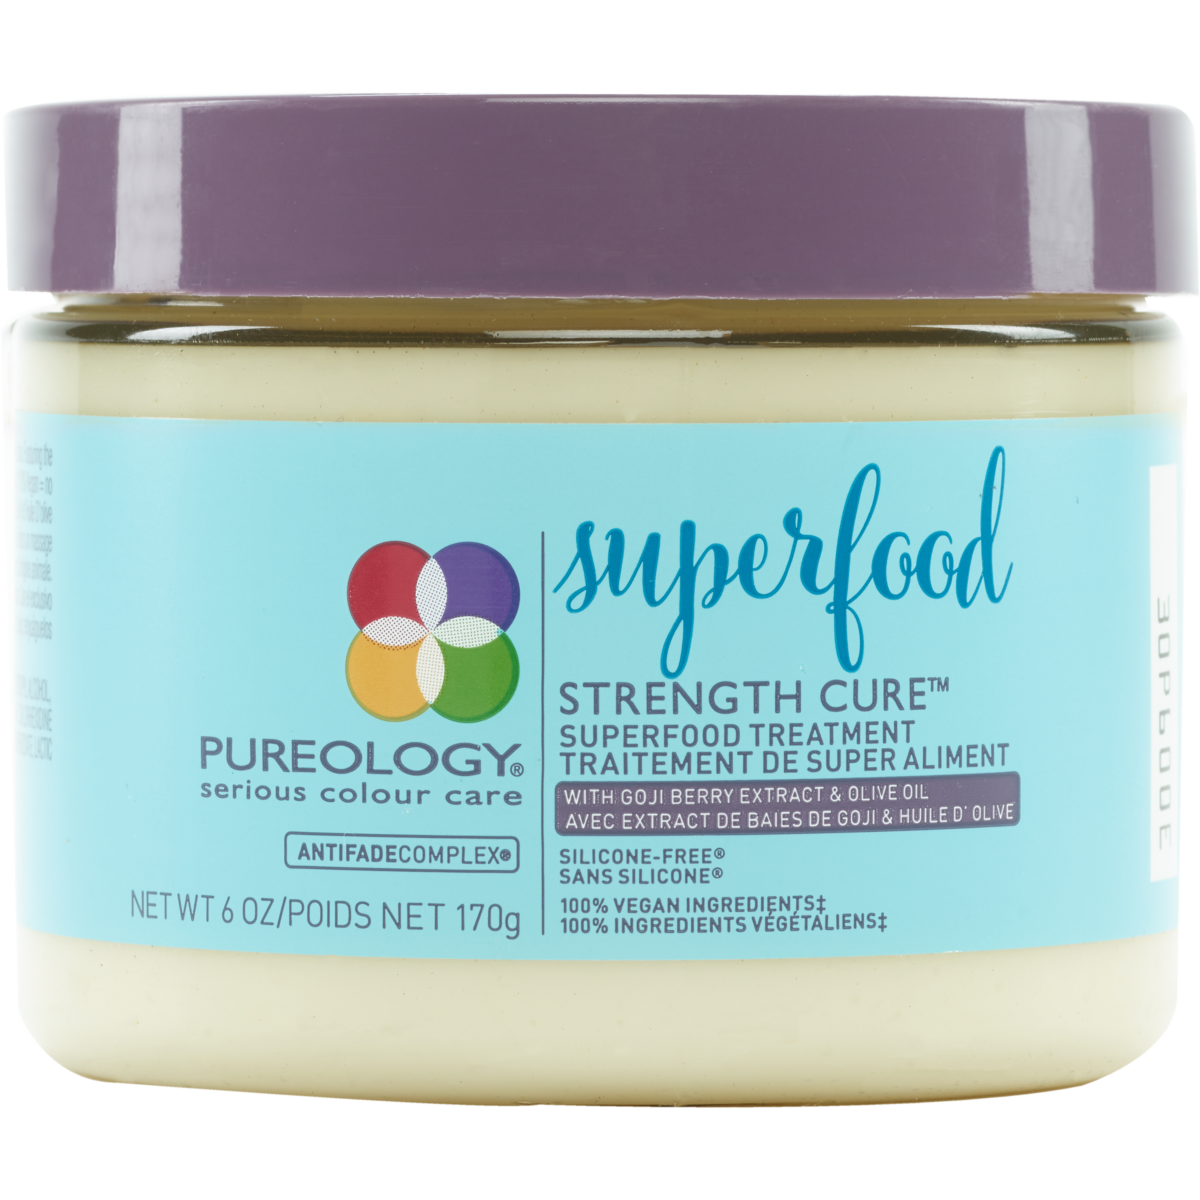 Pureology Superfood Strength Cure Mask